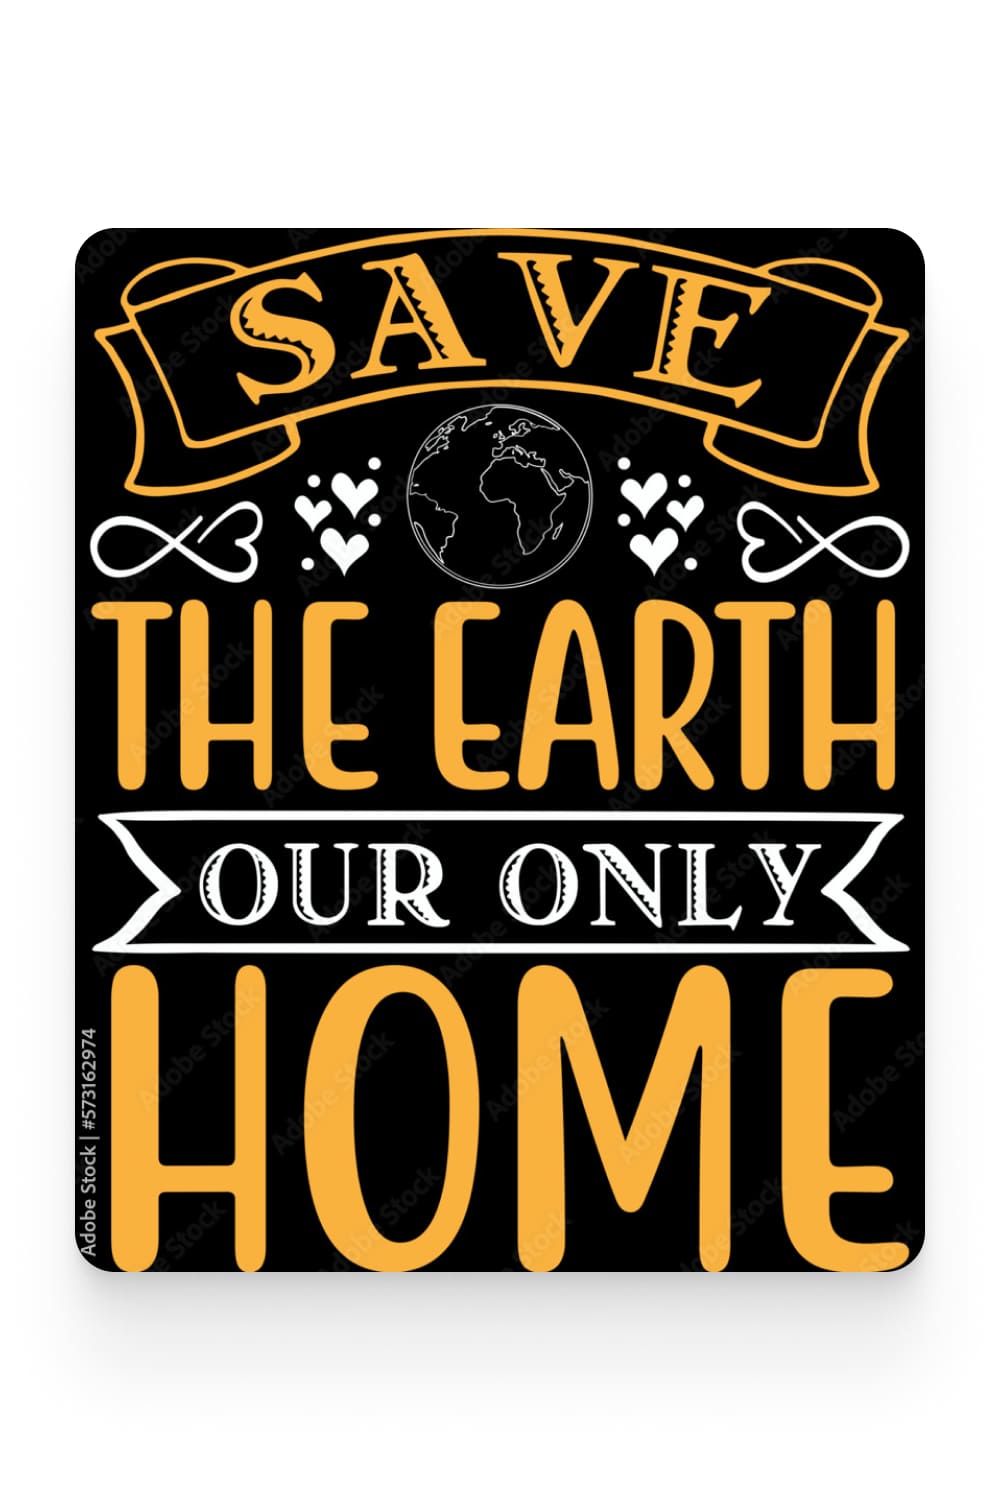 Save the earth our only home quote.